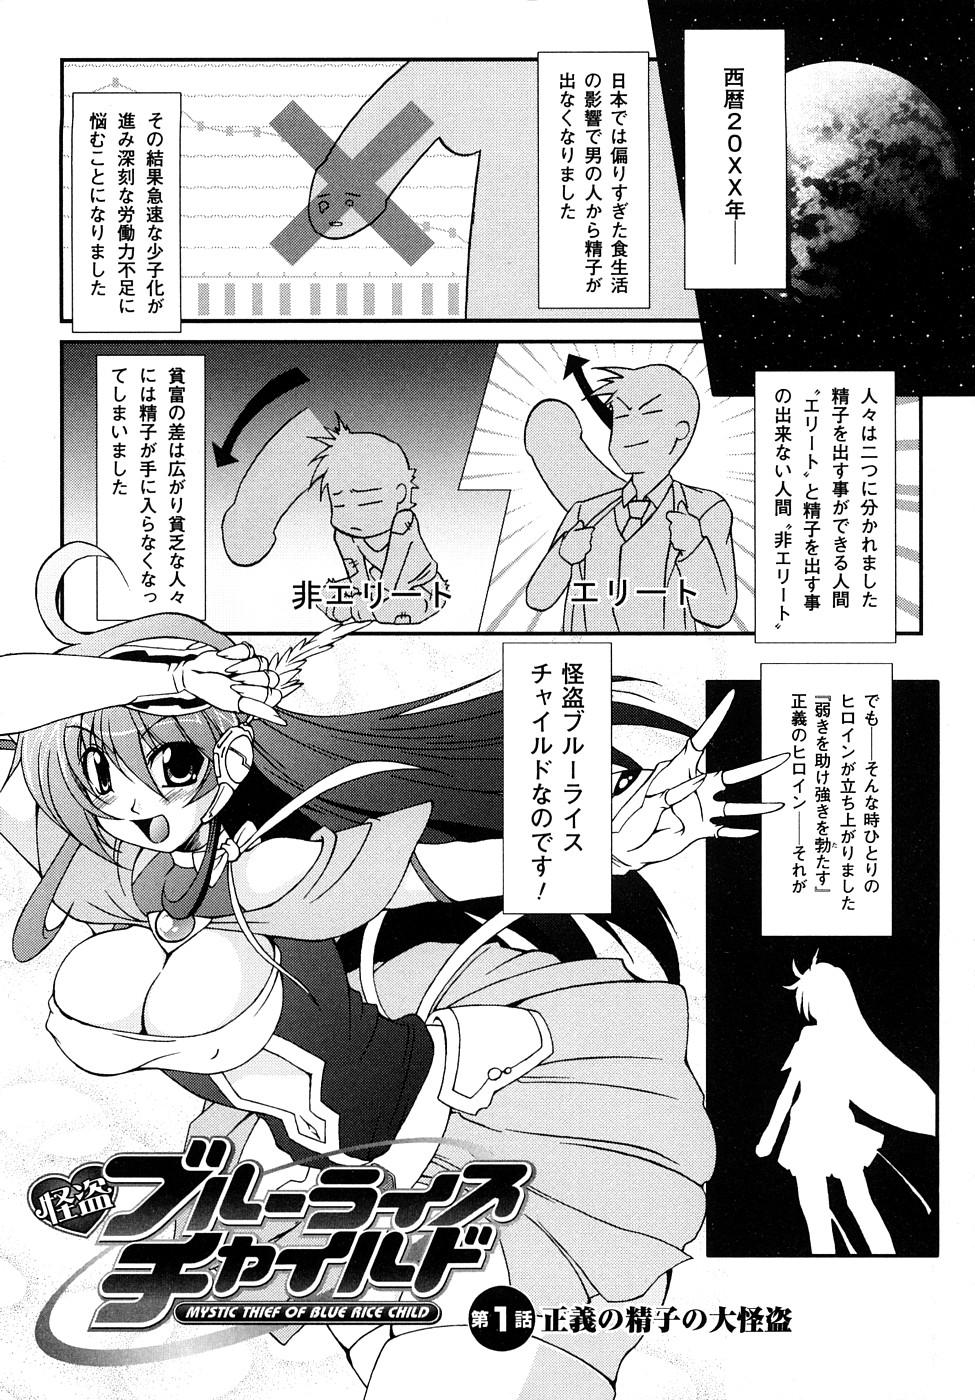 Transsexual Kaitou Blue Rice Child Gayfuck - Page 10